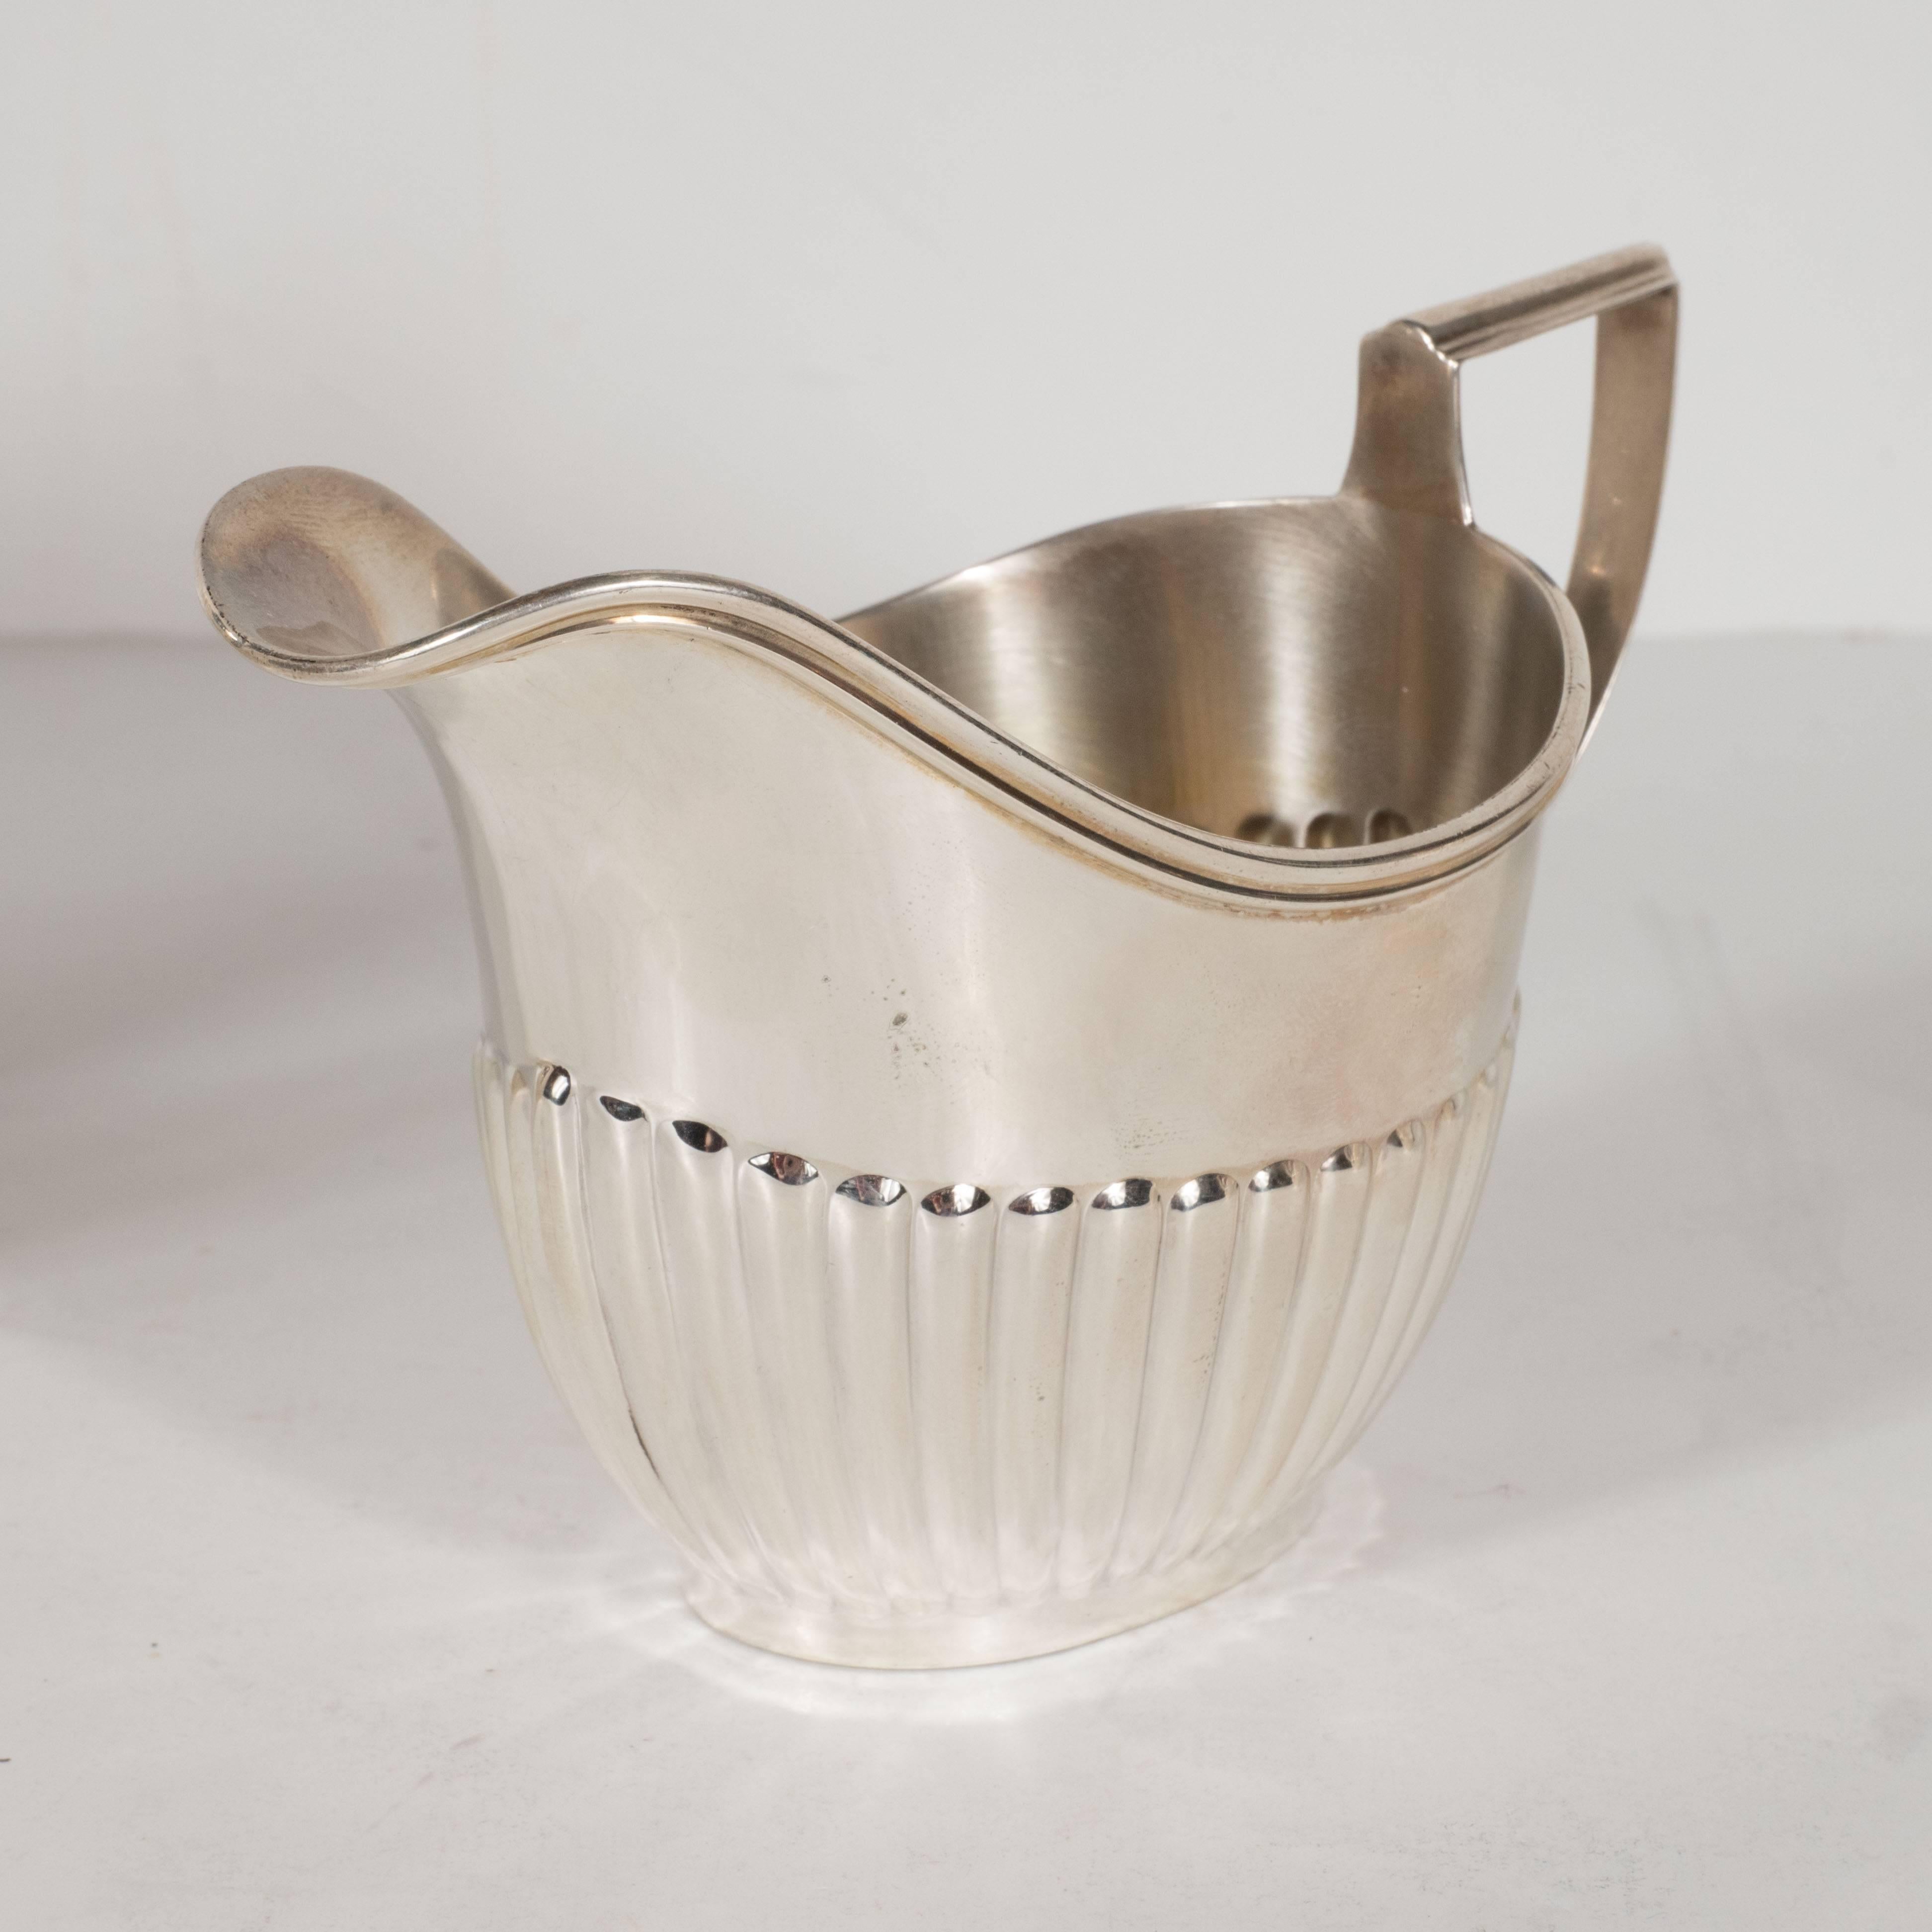 Mid-20th Century Elegant Art Deco Sterling Silver Coffee Service by Ryrie with Ebony Handles